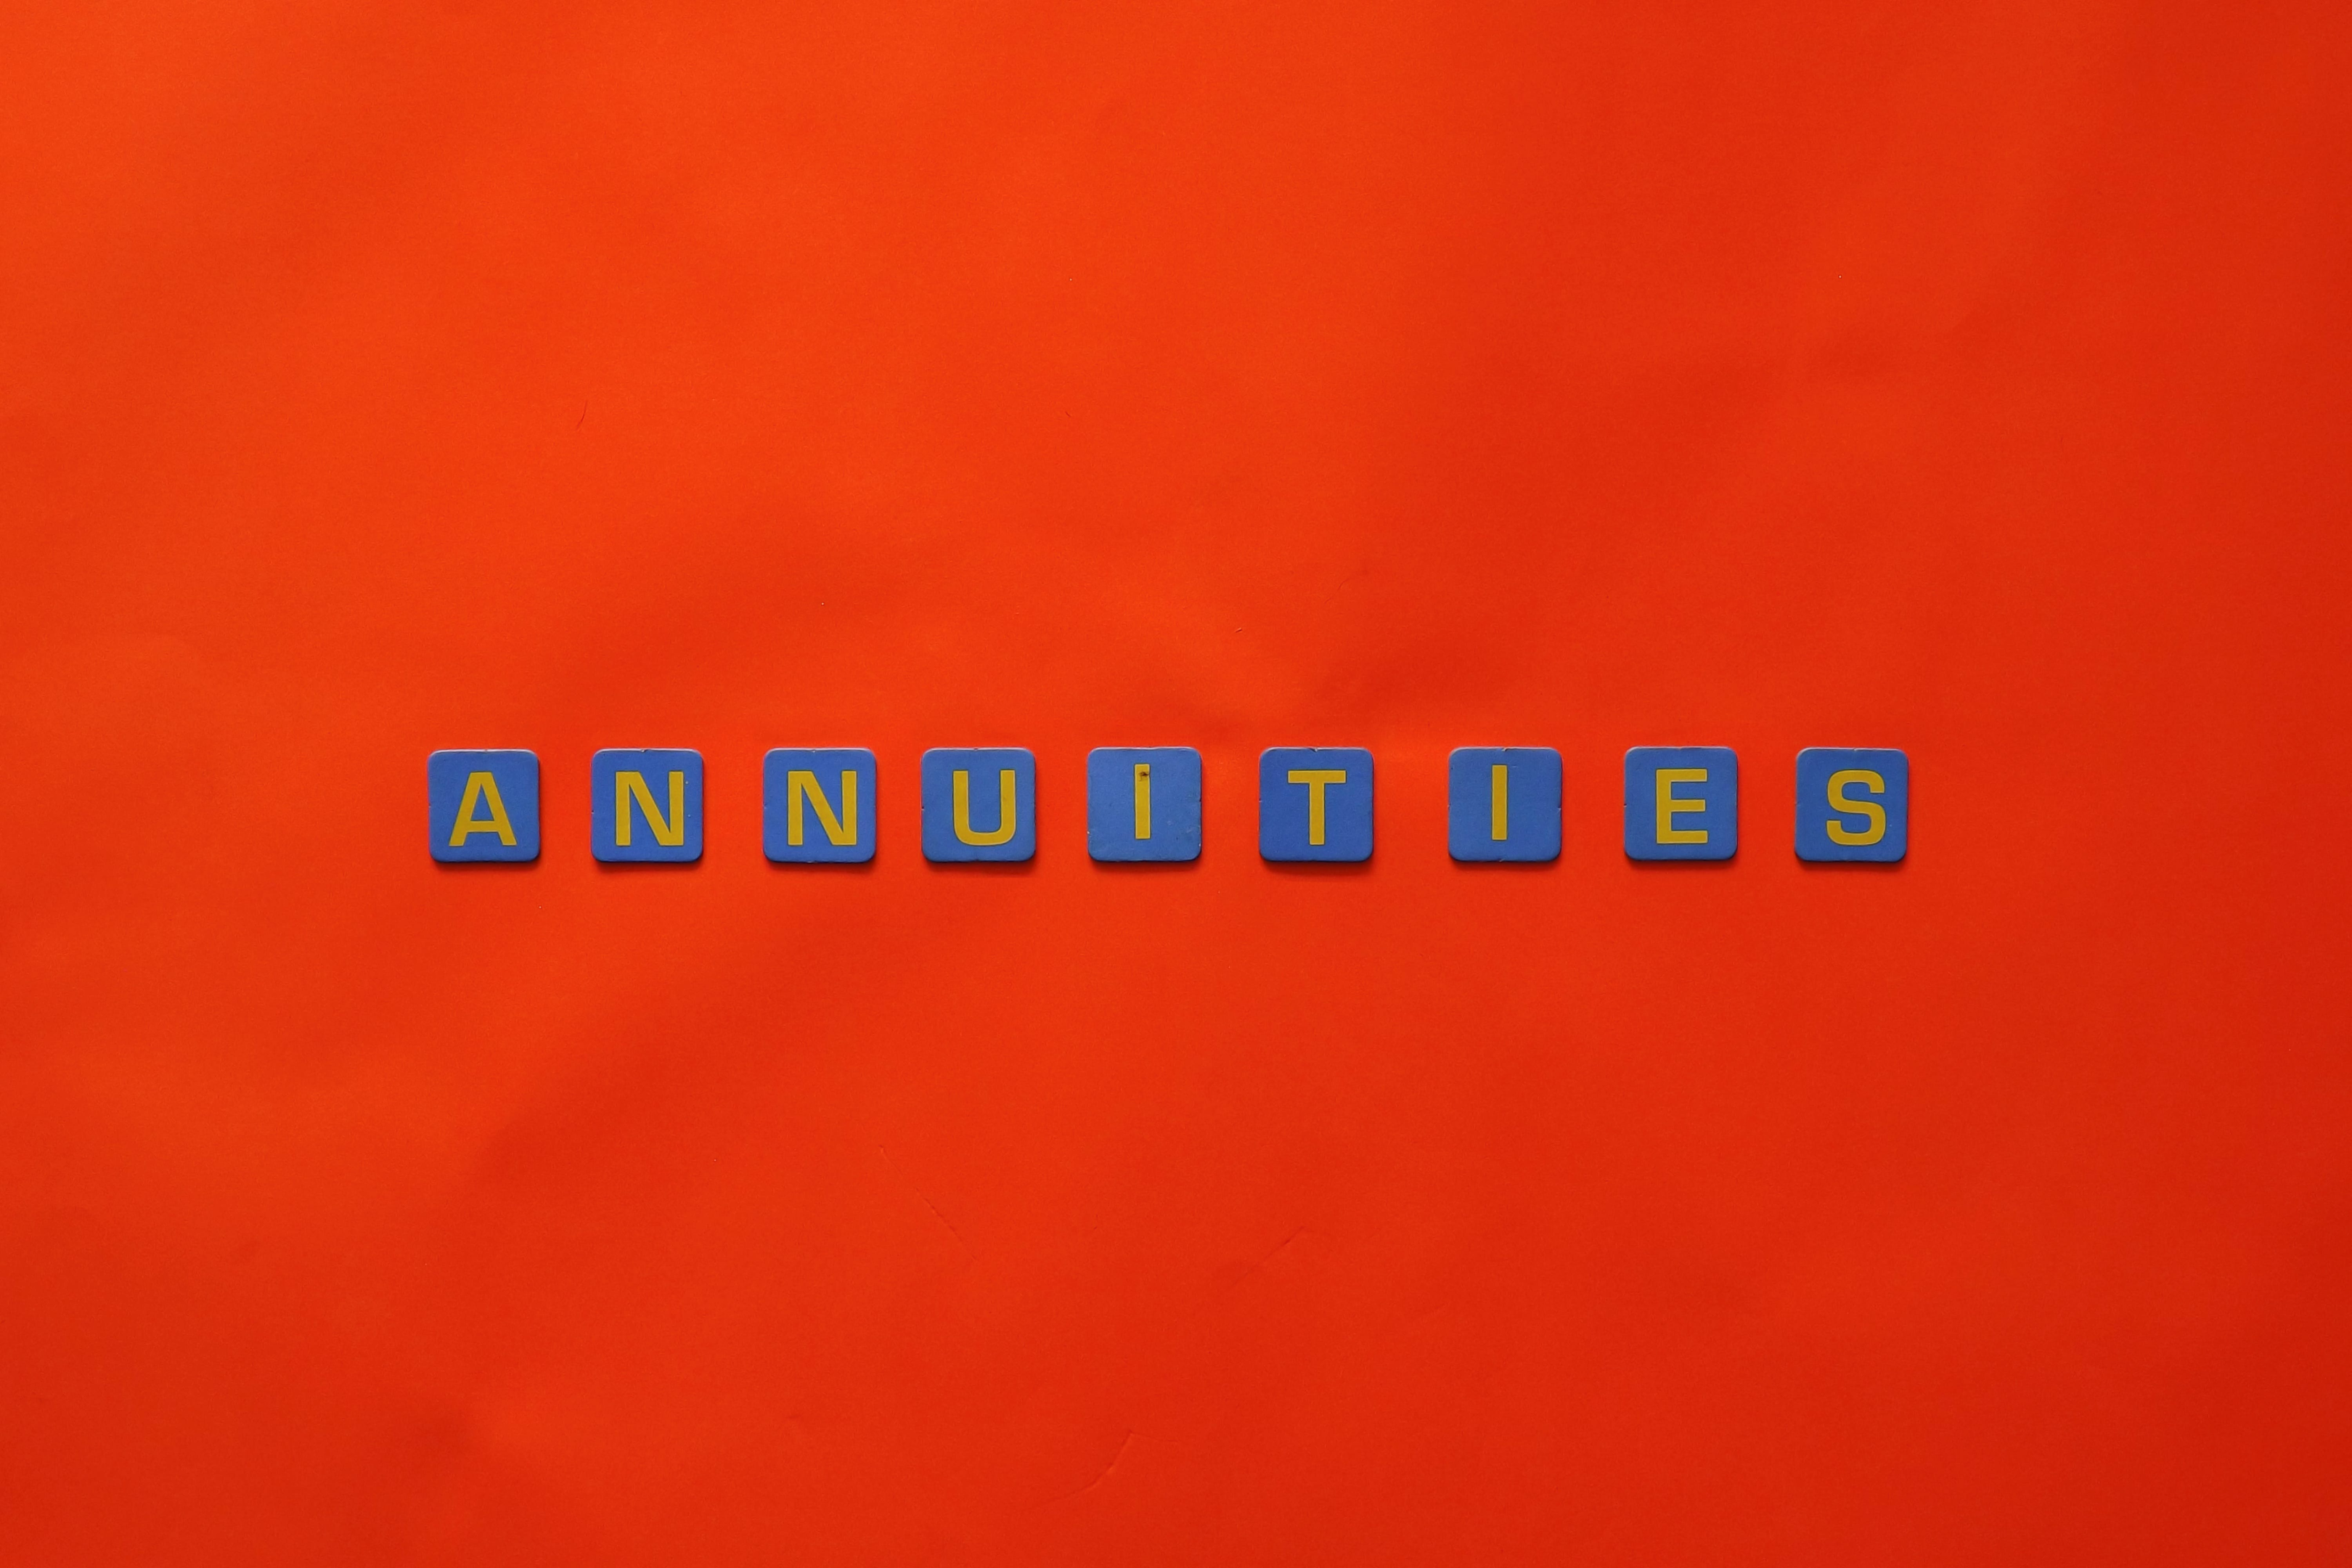 Annuity Payments for a straight life variable annuity